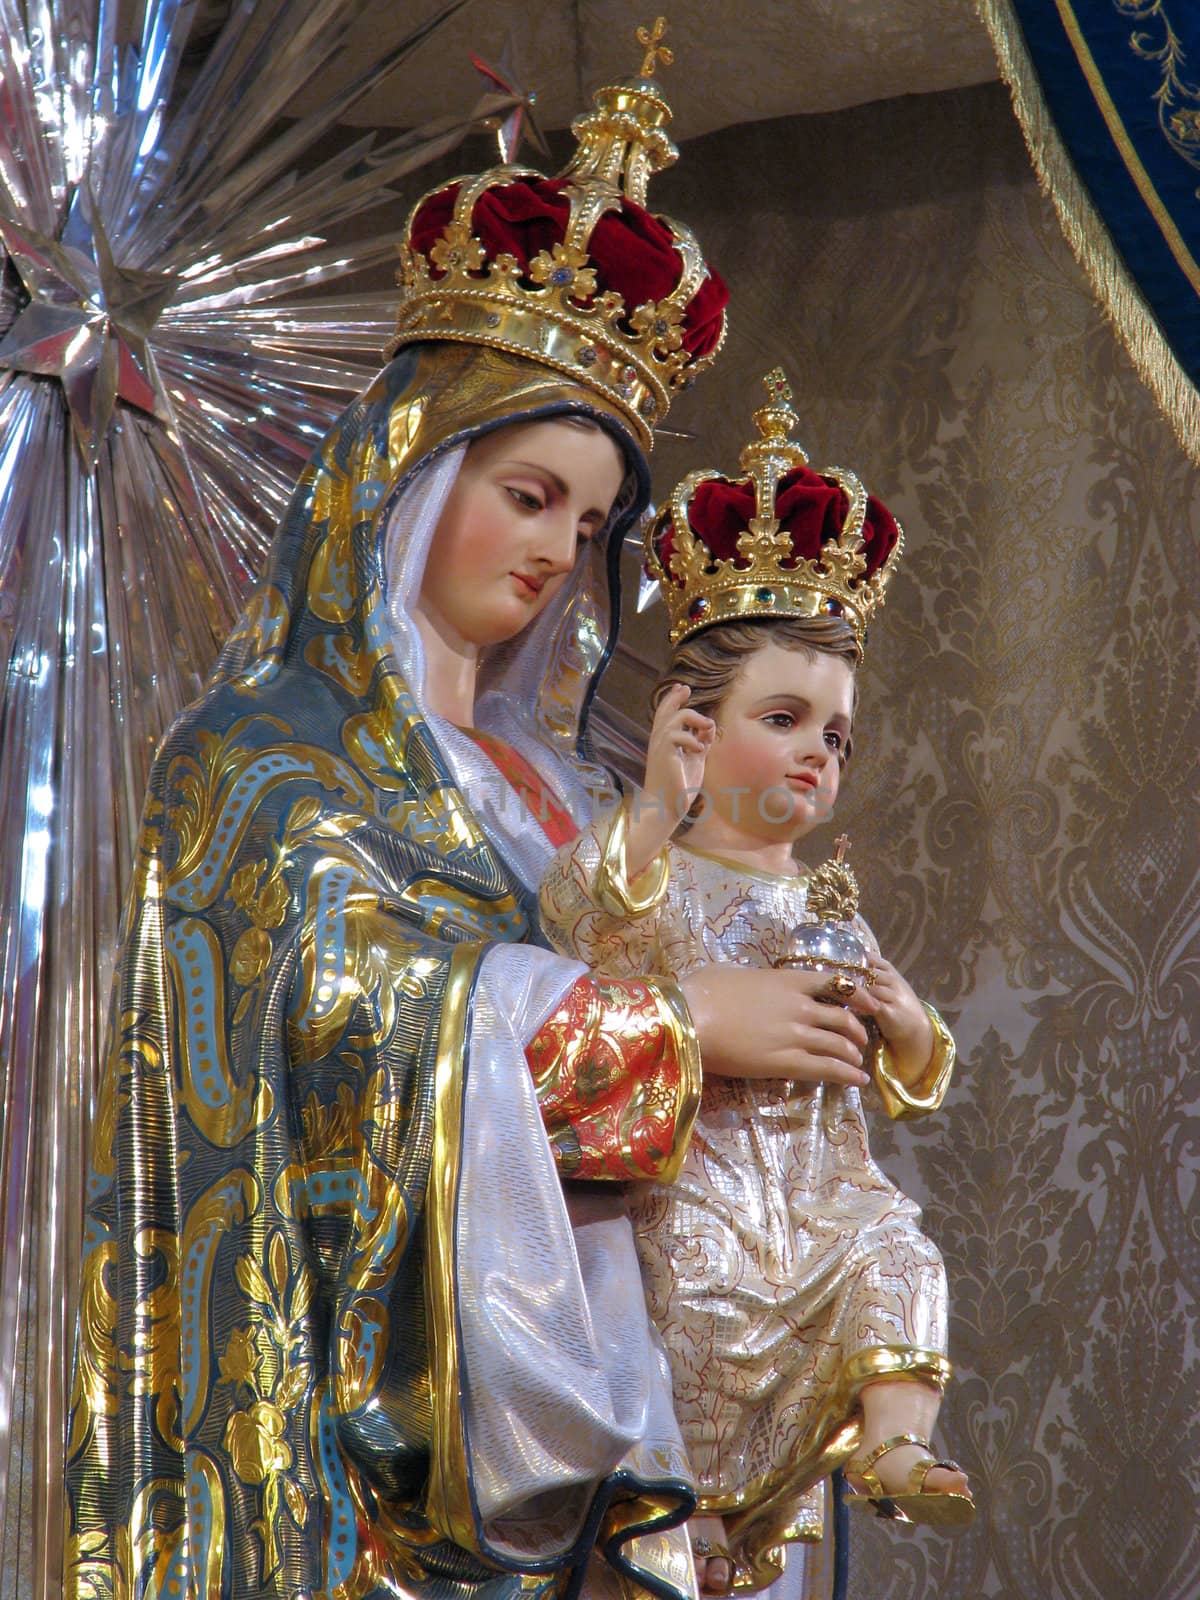 A detail of the statue of Our Lady of the Sacred Heart of Jesus displayed in the Sacro Cuor Parish Church, Sliema, Malta.